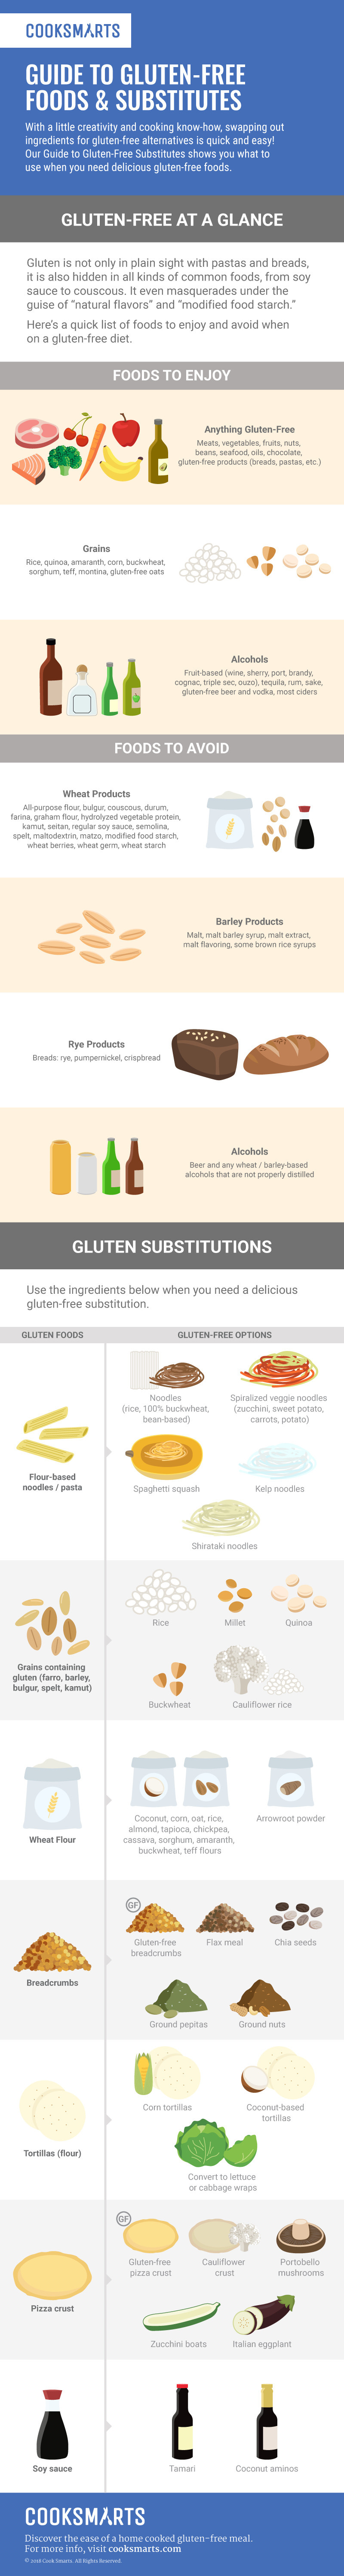 Guide to Gluten-Free Substitutes [Infographic] | Cook Smarts